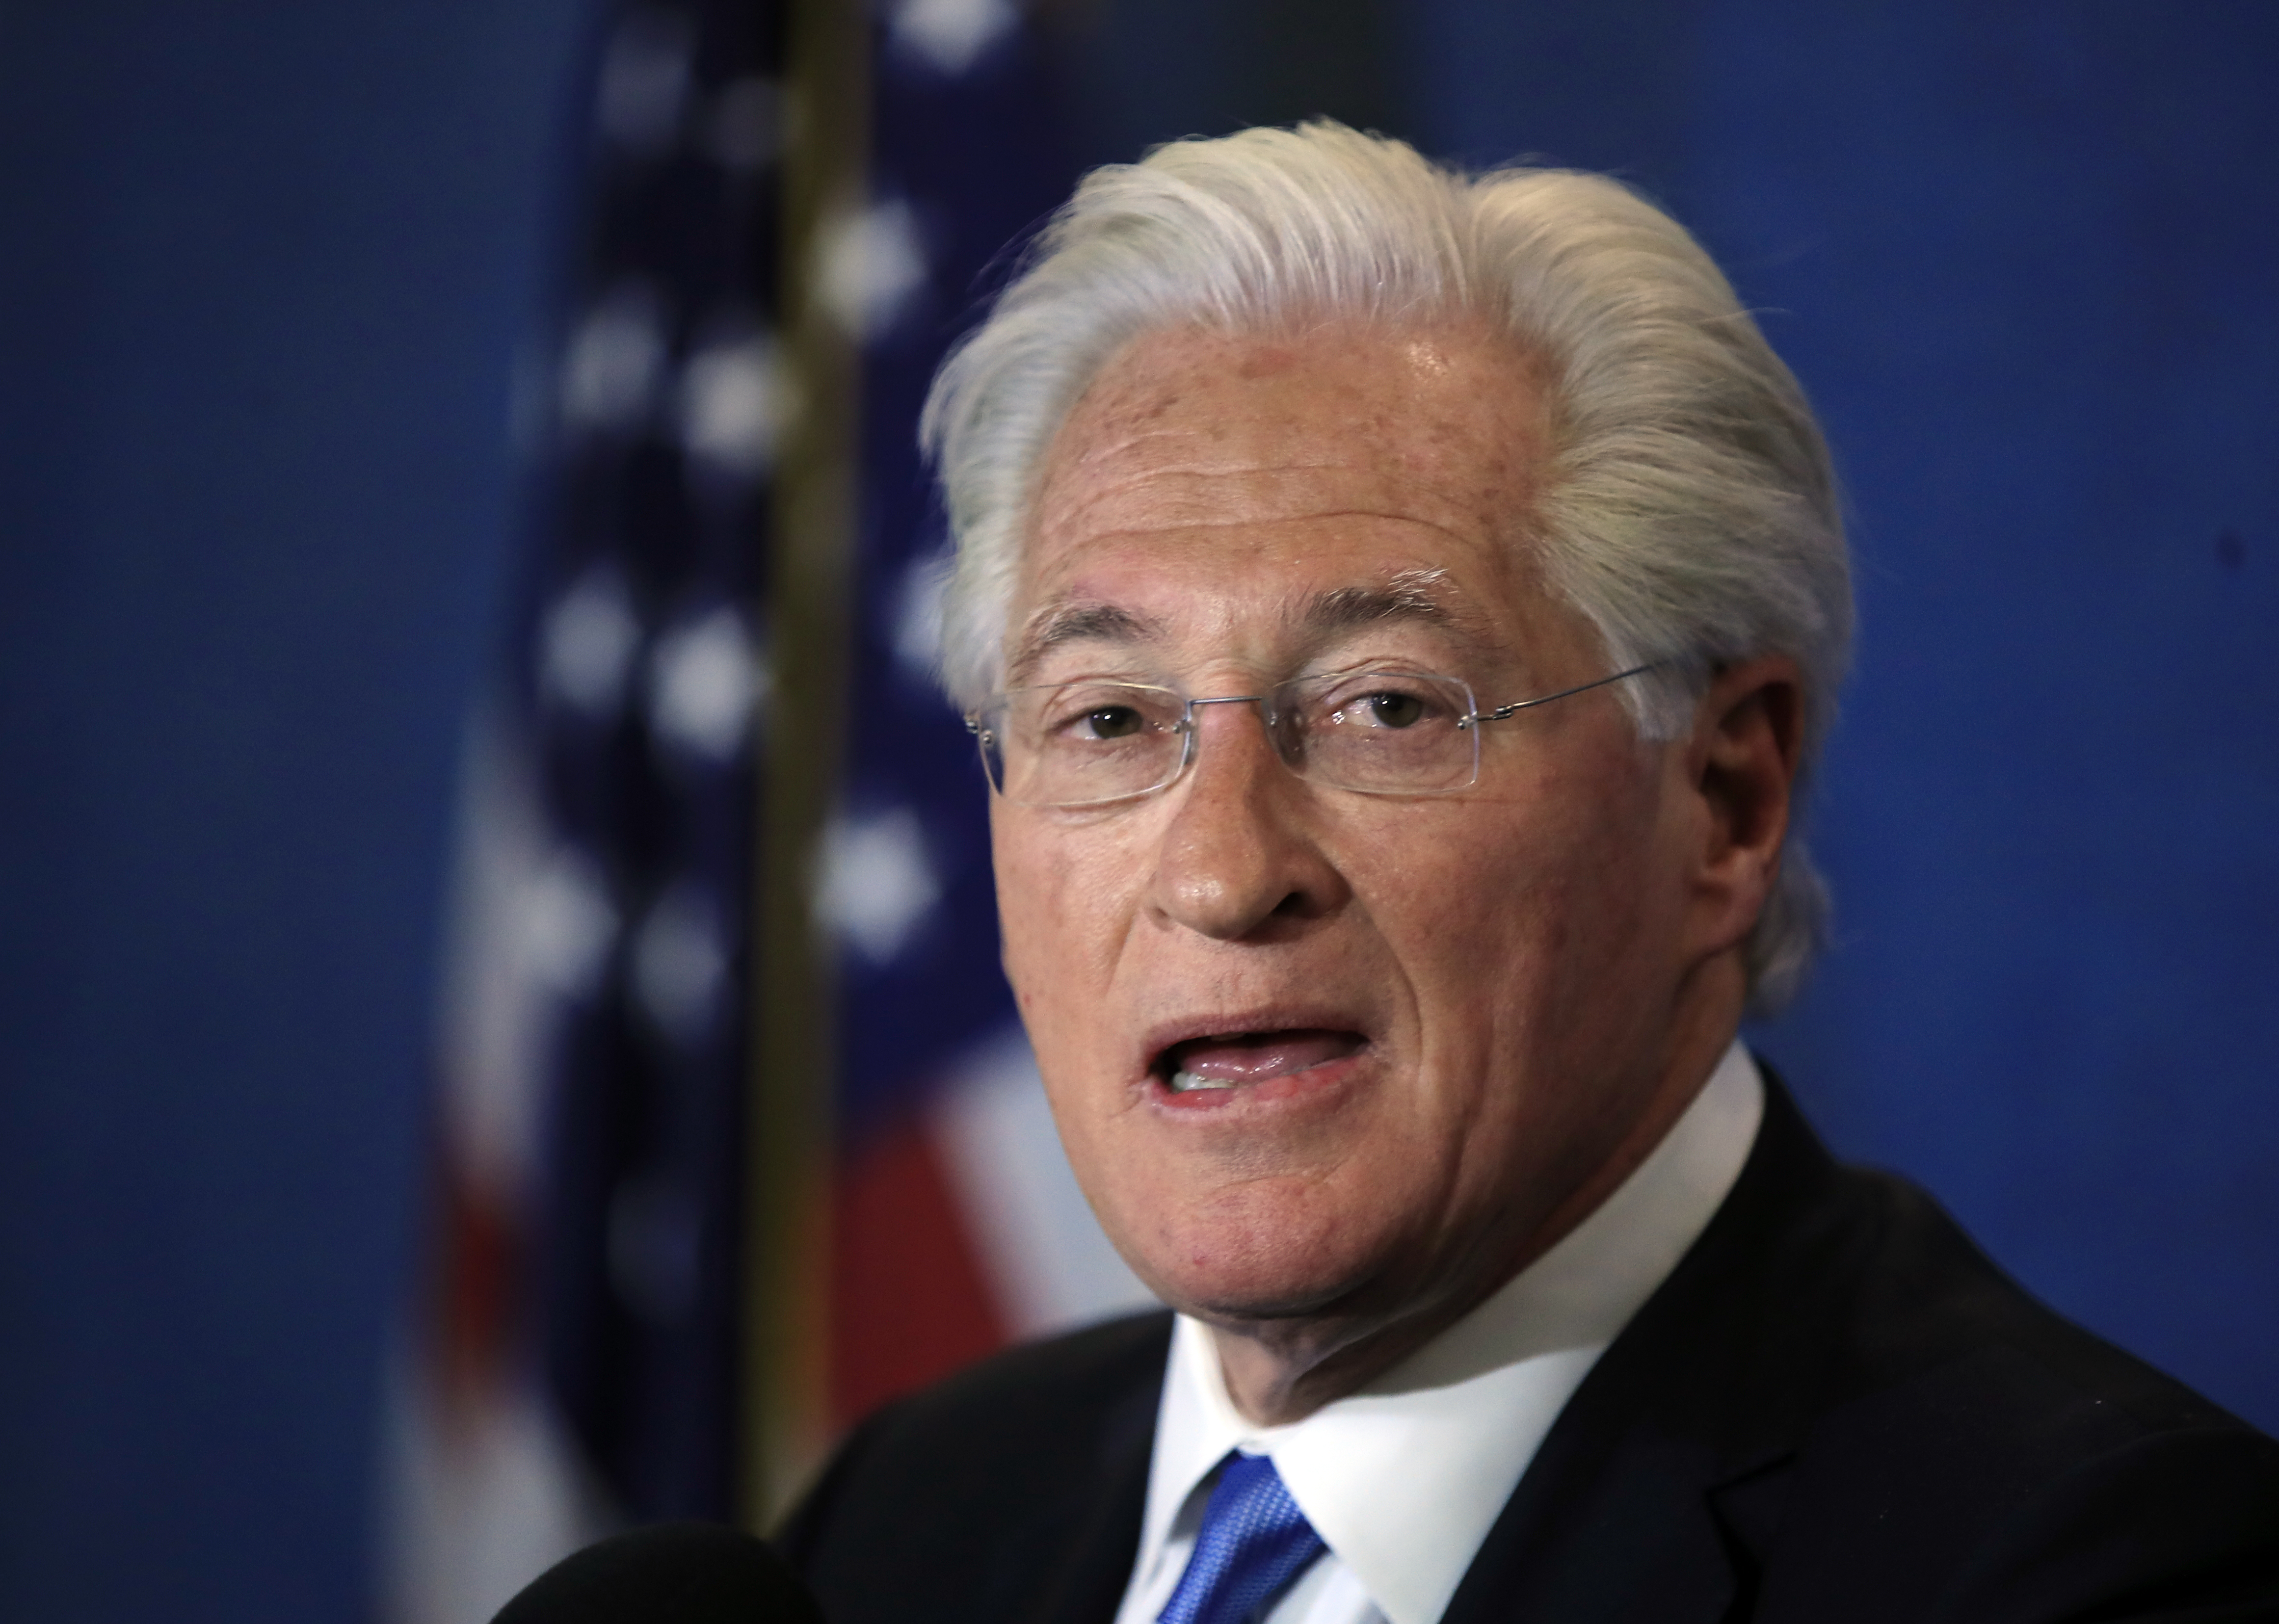 Marc Kasowitz personal attorney of President Donald Trump makes a statement at the National Press Club, following the congressional testimony of former FBI Director James Comey in Washington, Thursday, June 8, 2017. (AP Photo/Manuel Balce Ceneta)